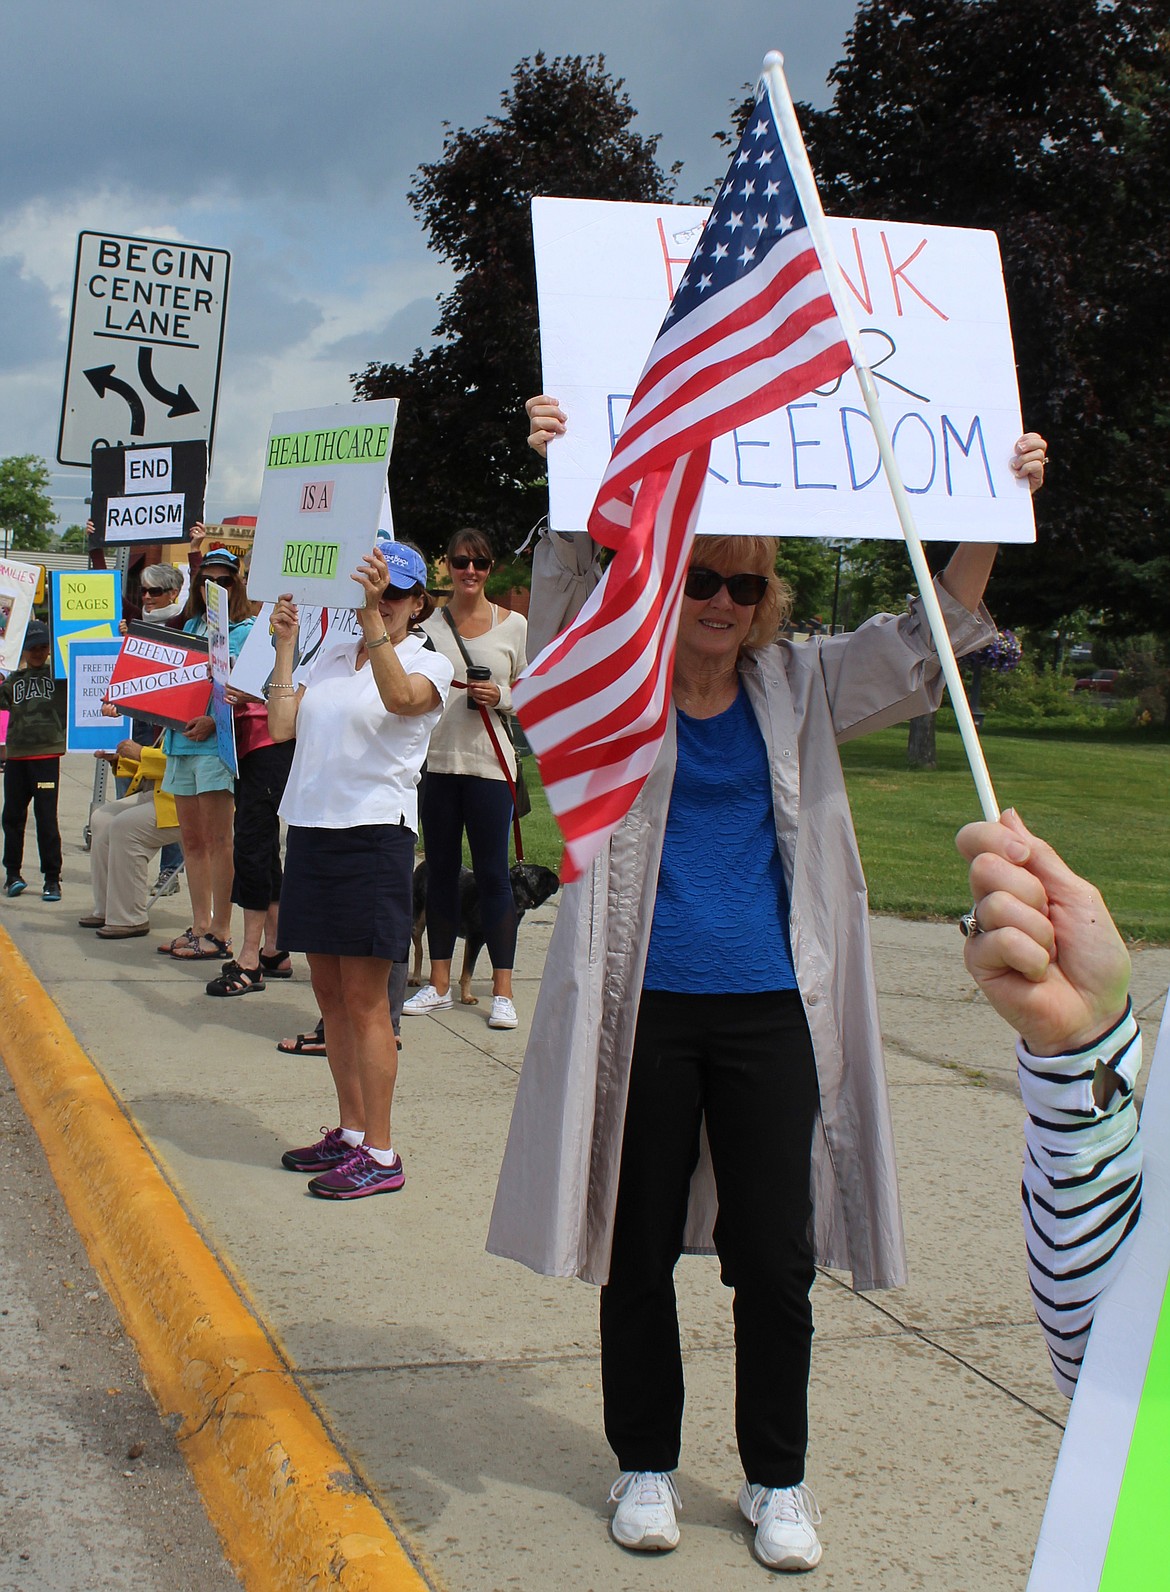 Arlene Ross, the mother of two sons with a history of military service, holds a &#145;Honk for Freedom&#146; sign during a Resist Trump rally Tuesday along Main Street in Kalispell. (Duncan Adams/Daily Inter Lake)